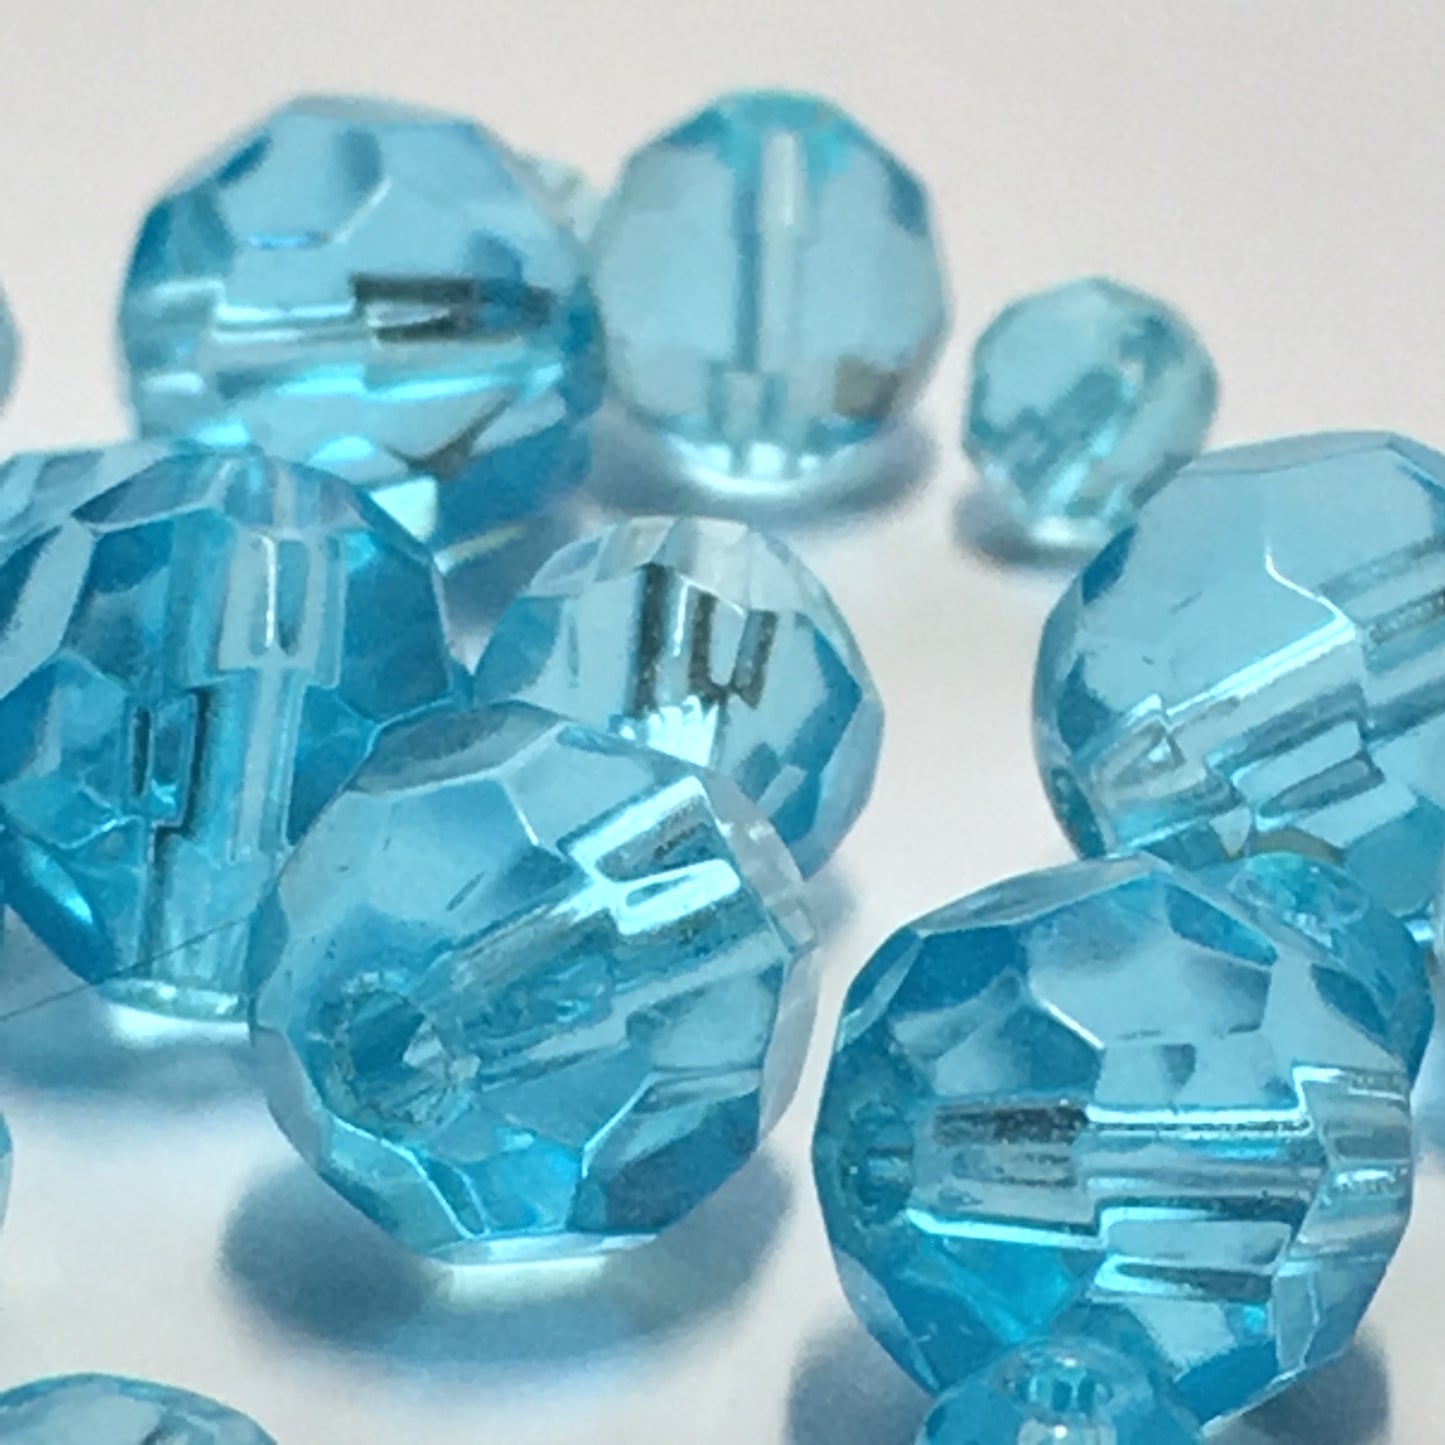 Transparent Aqua Blue Glass Faceted Round Beads for Bracelet, 4-8 mm, 33 Beads